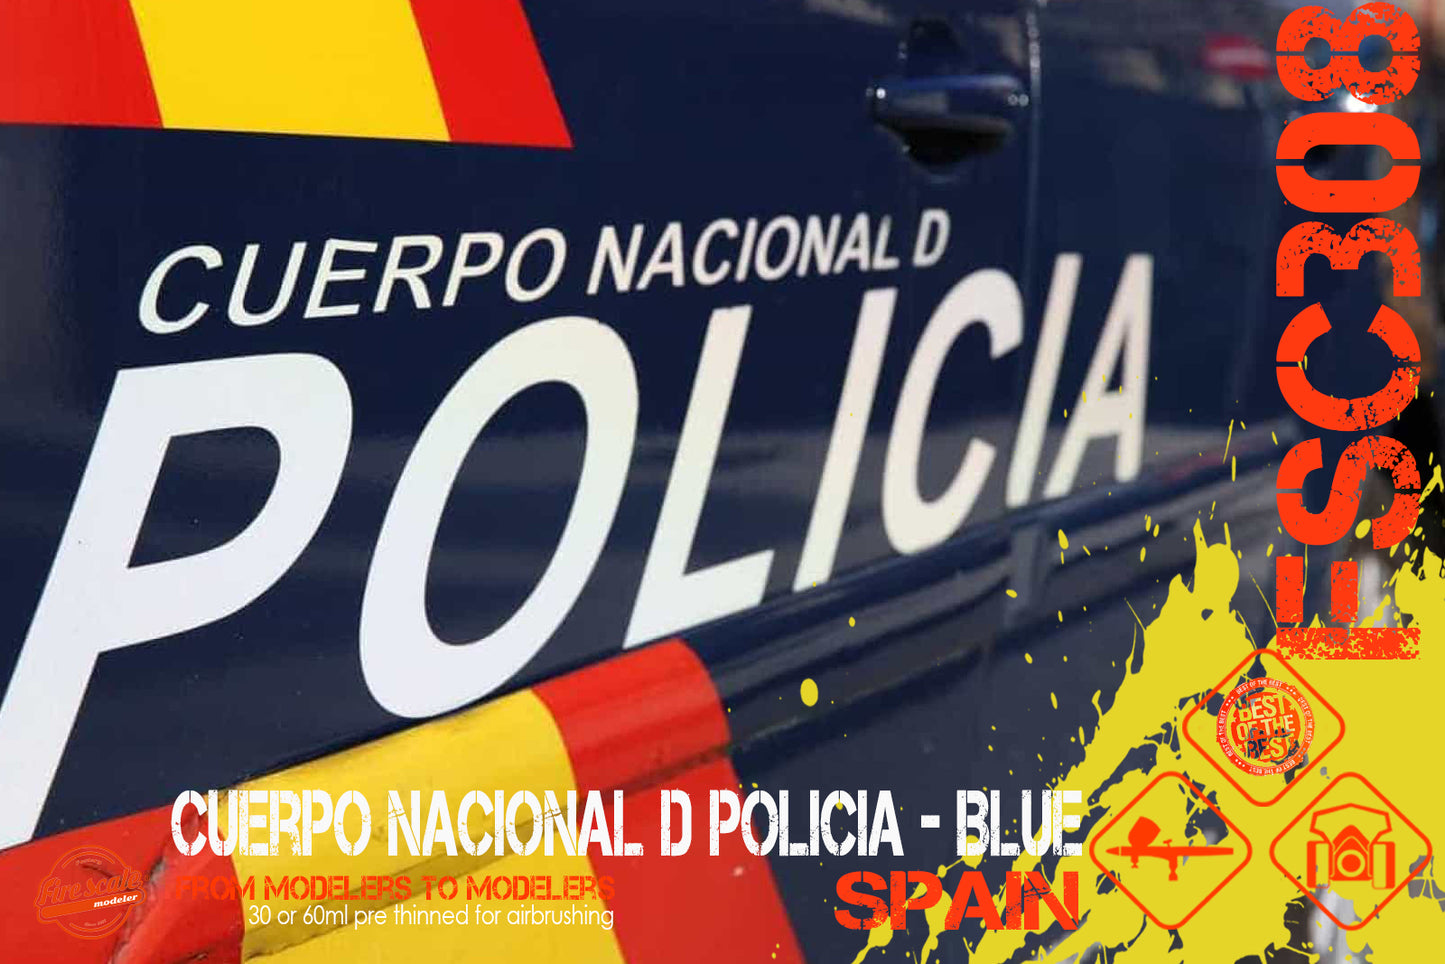 National Police Department Spain - Blue